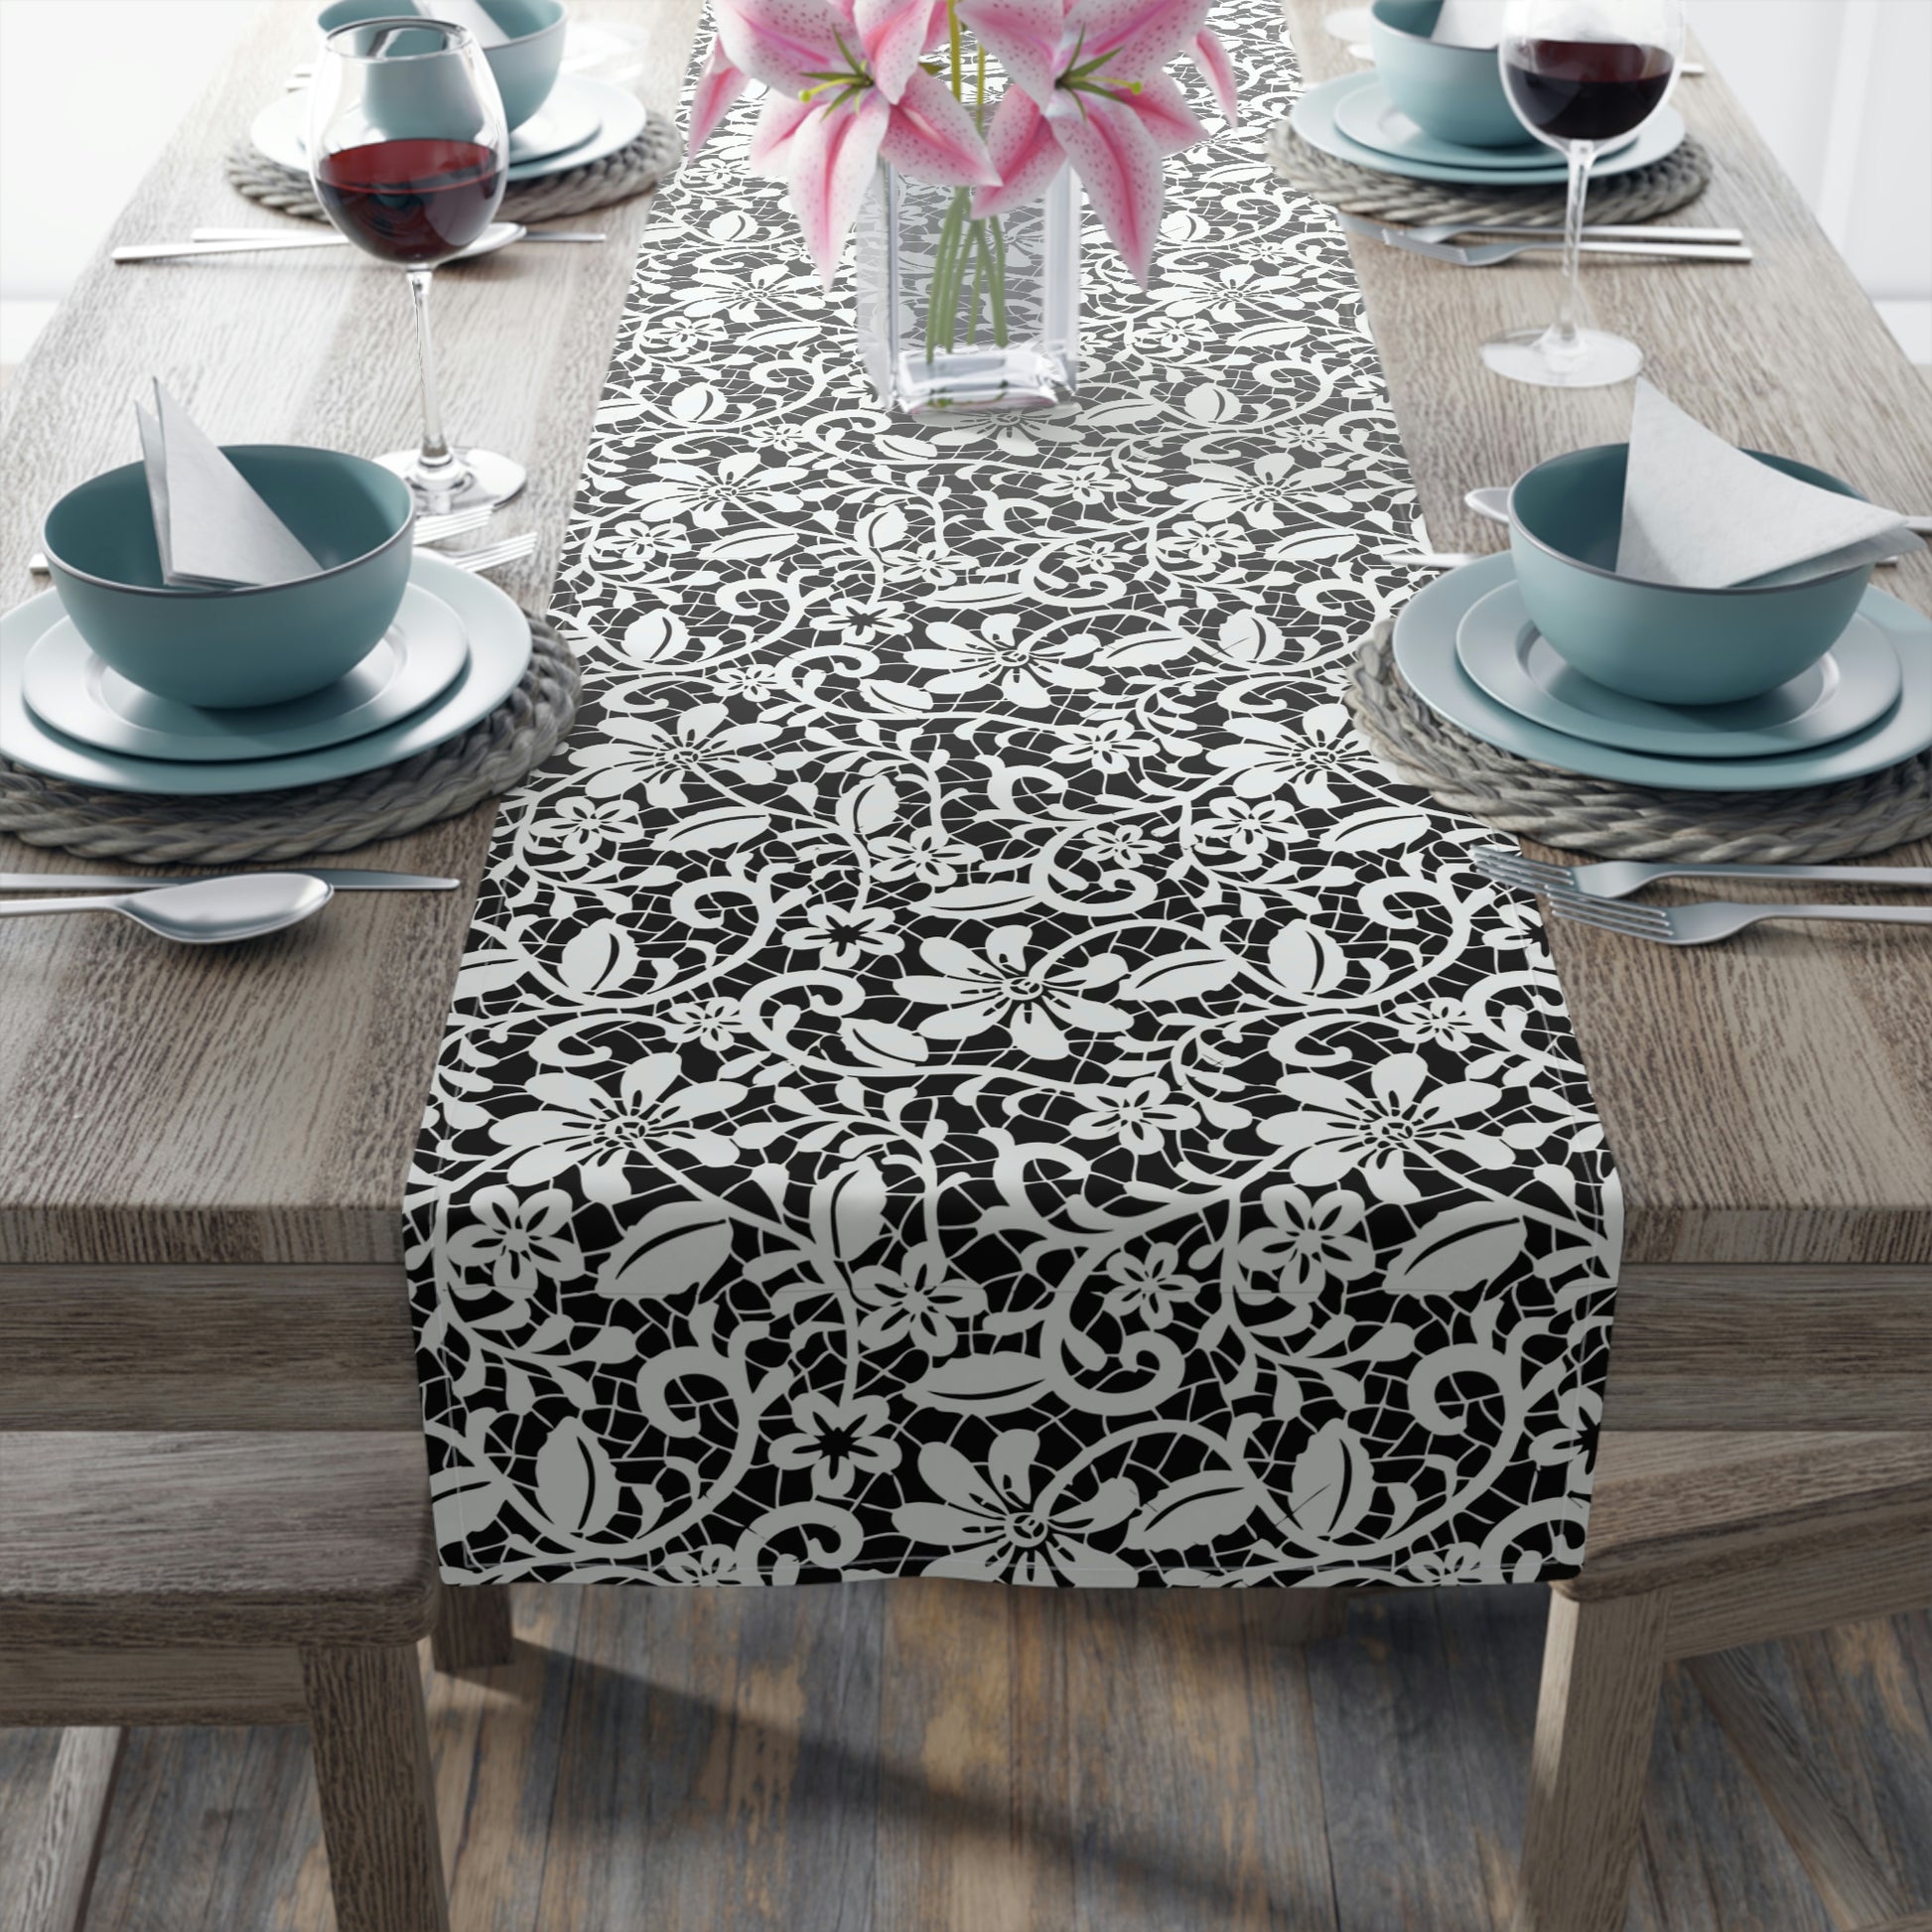 black and white floral table runner